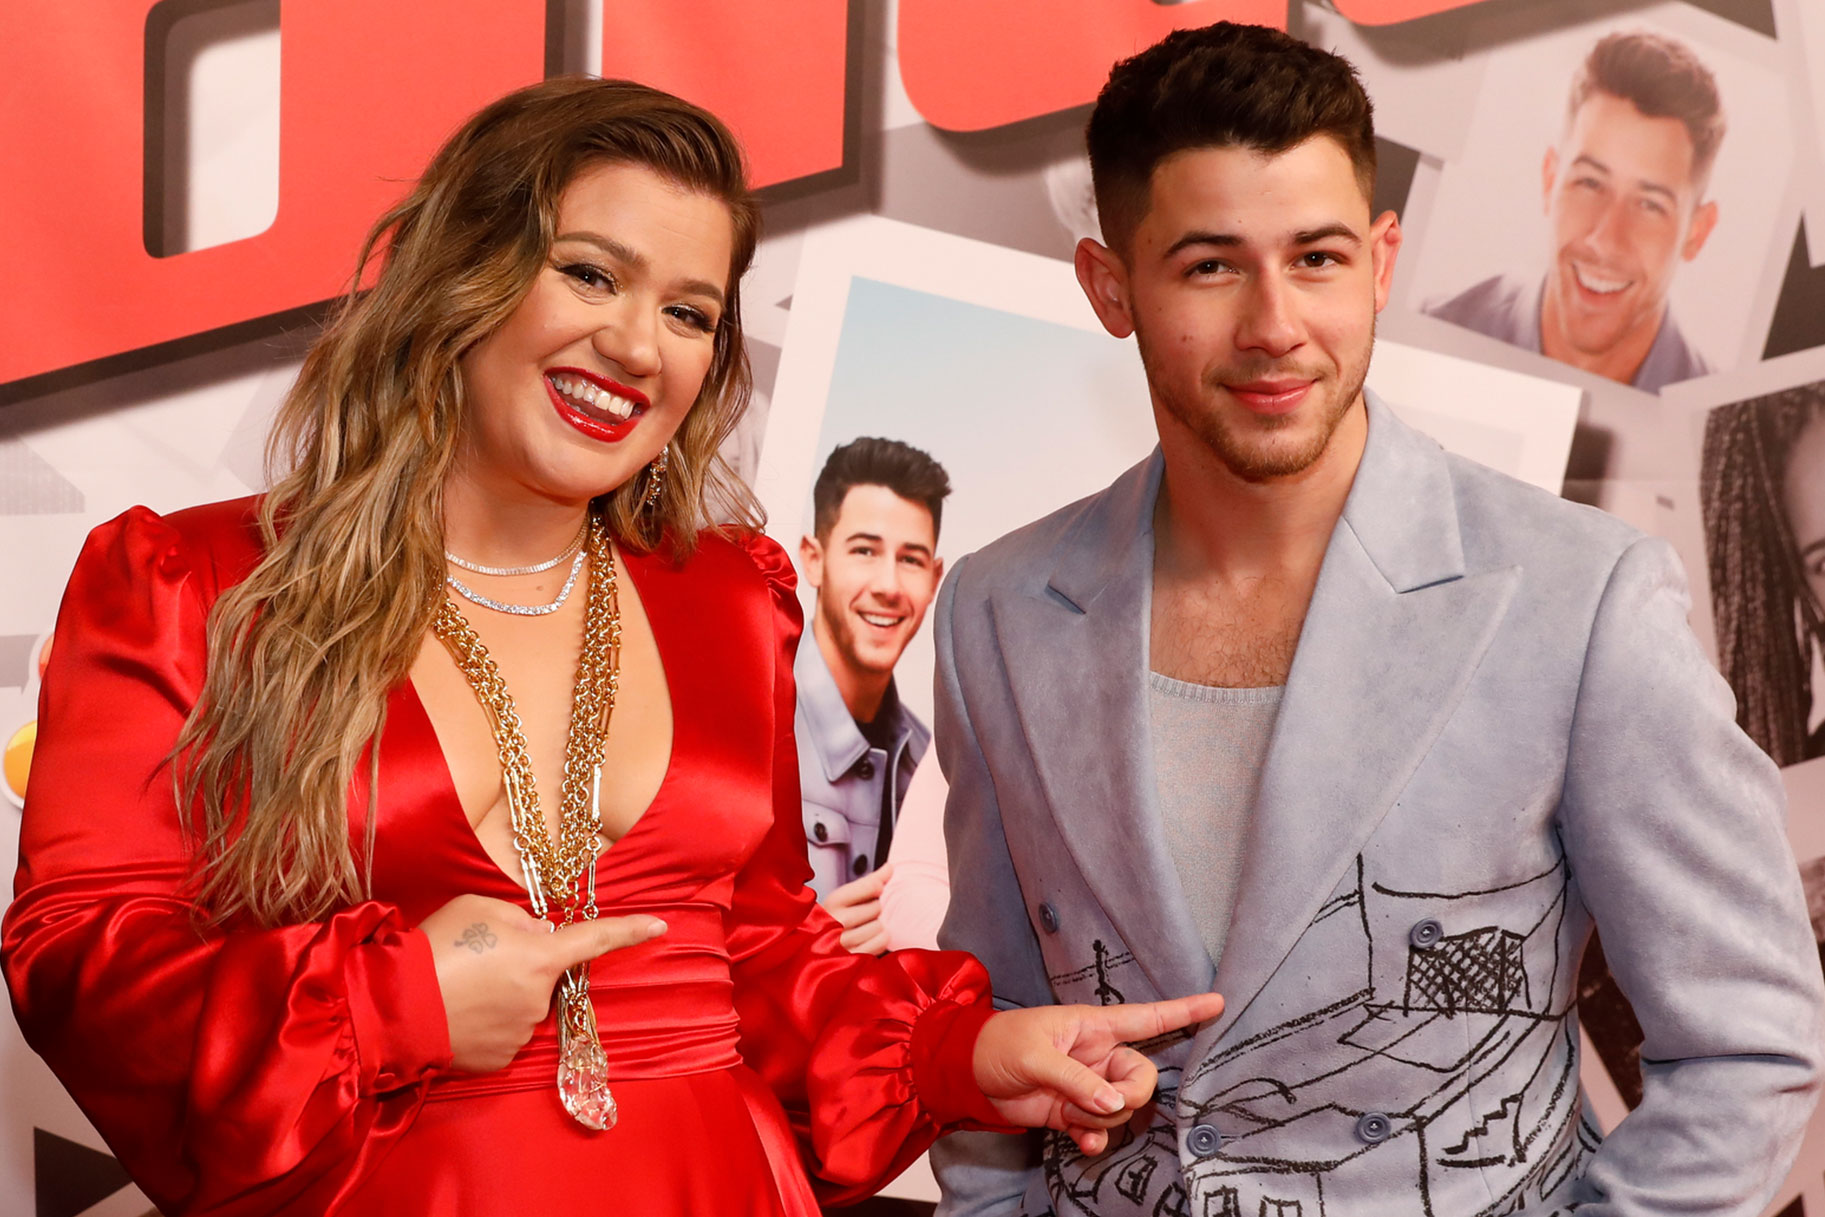 Kelly Clarkson posing and pointing at Nick Jonas on a red carpet